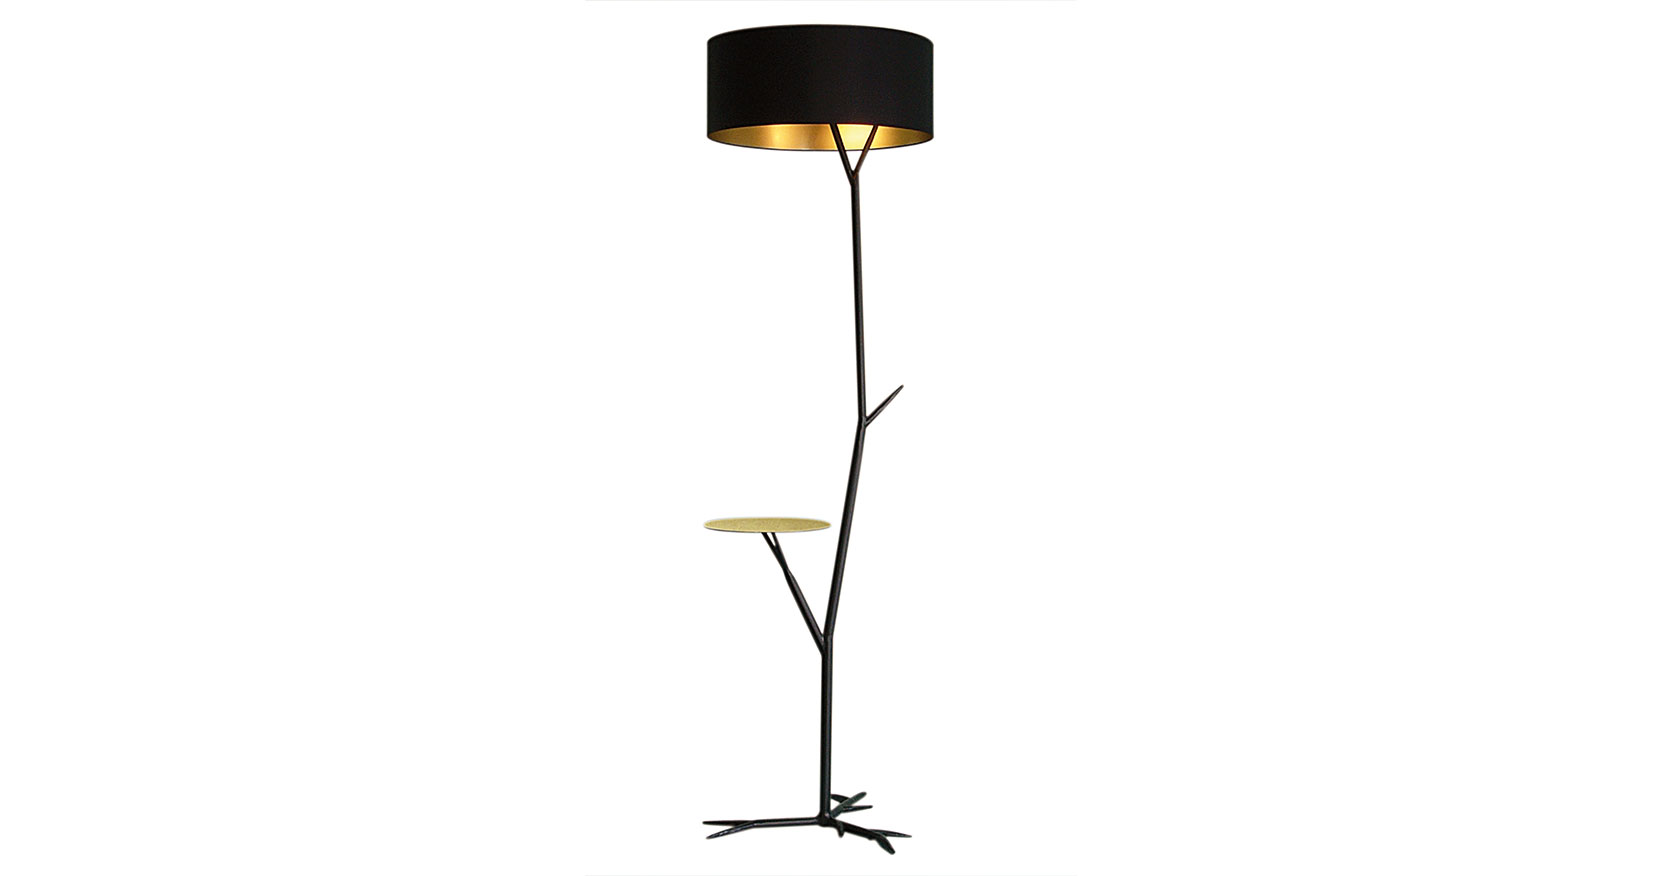 Eric Robin, sculptural floor lamp with a foot in the shape of a black wrought iron branch, a small golden tablet that comes out of the branch, and an oval black exterior and gold interior lampshade